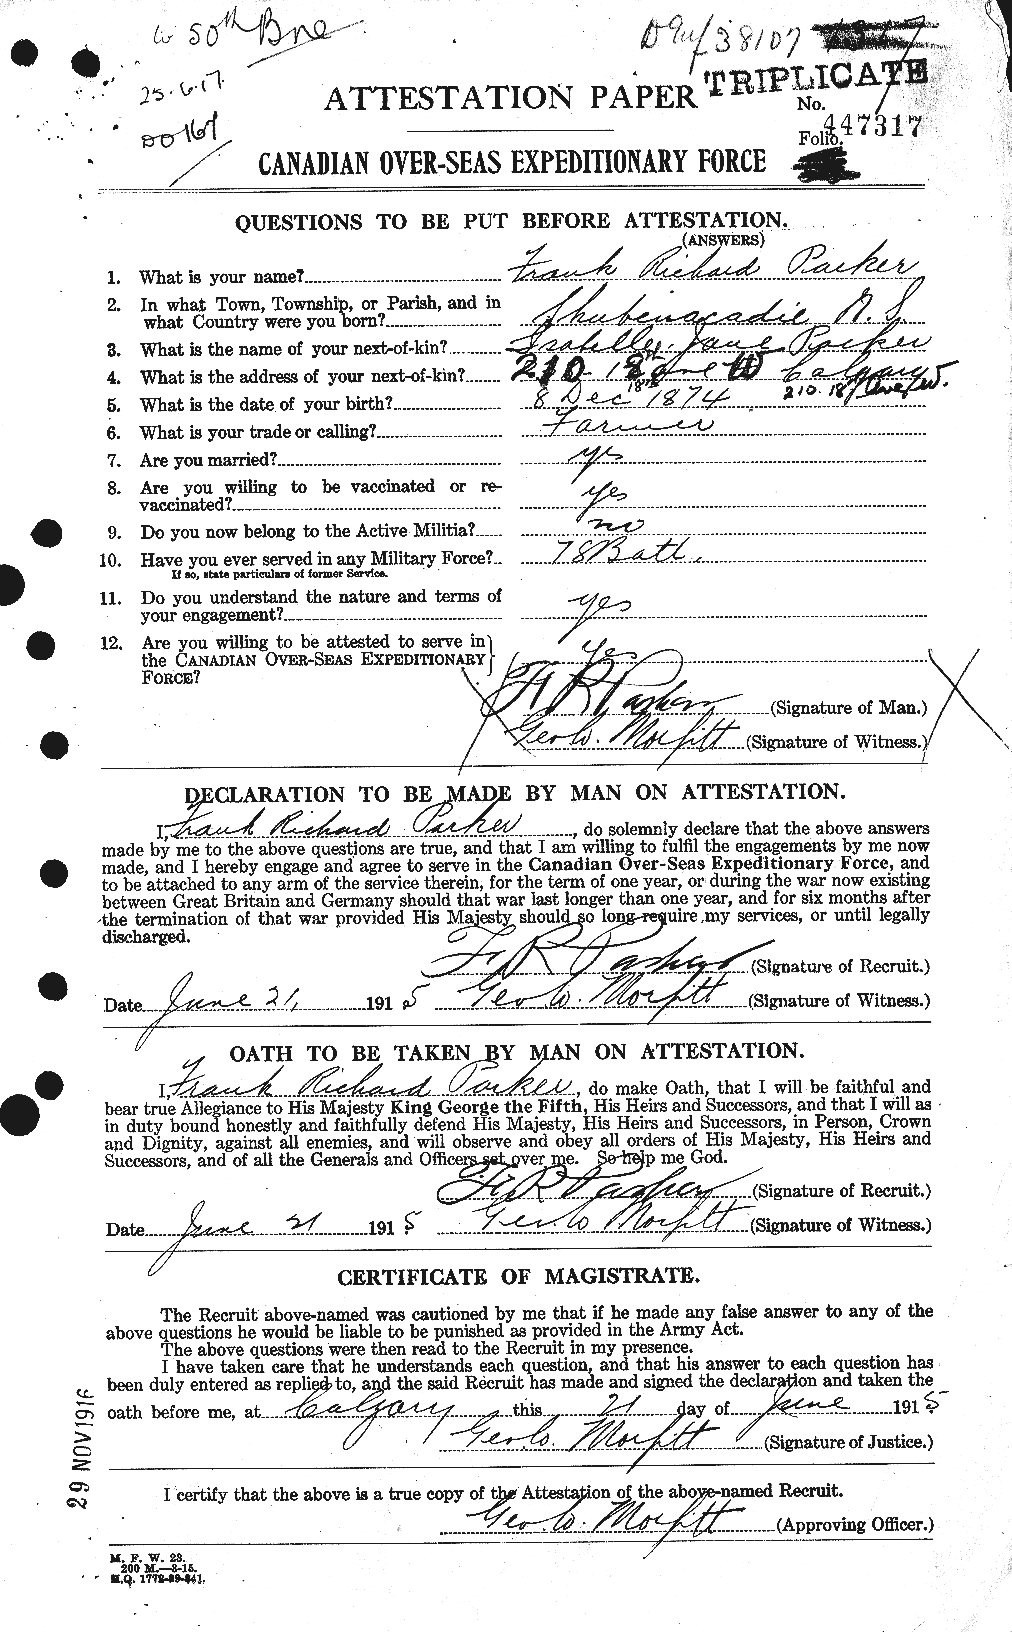 Personnel Records of the First World War - CEF 565193a